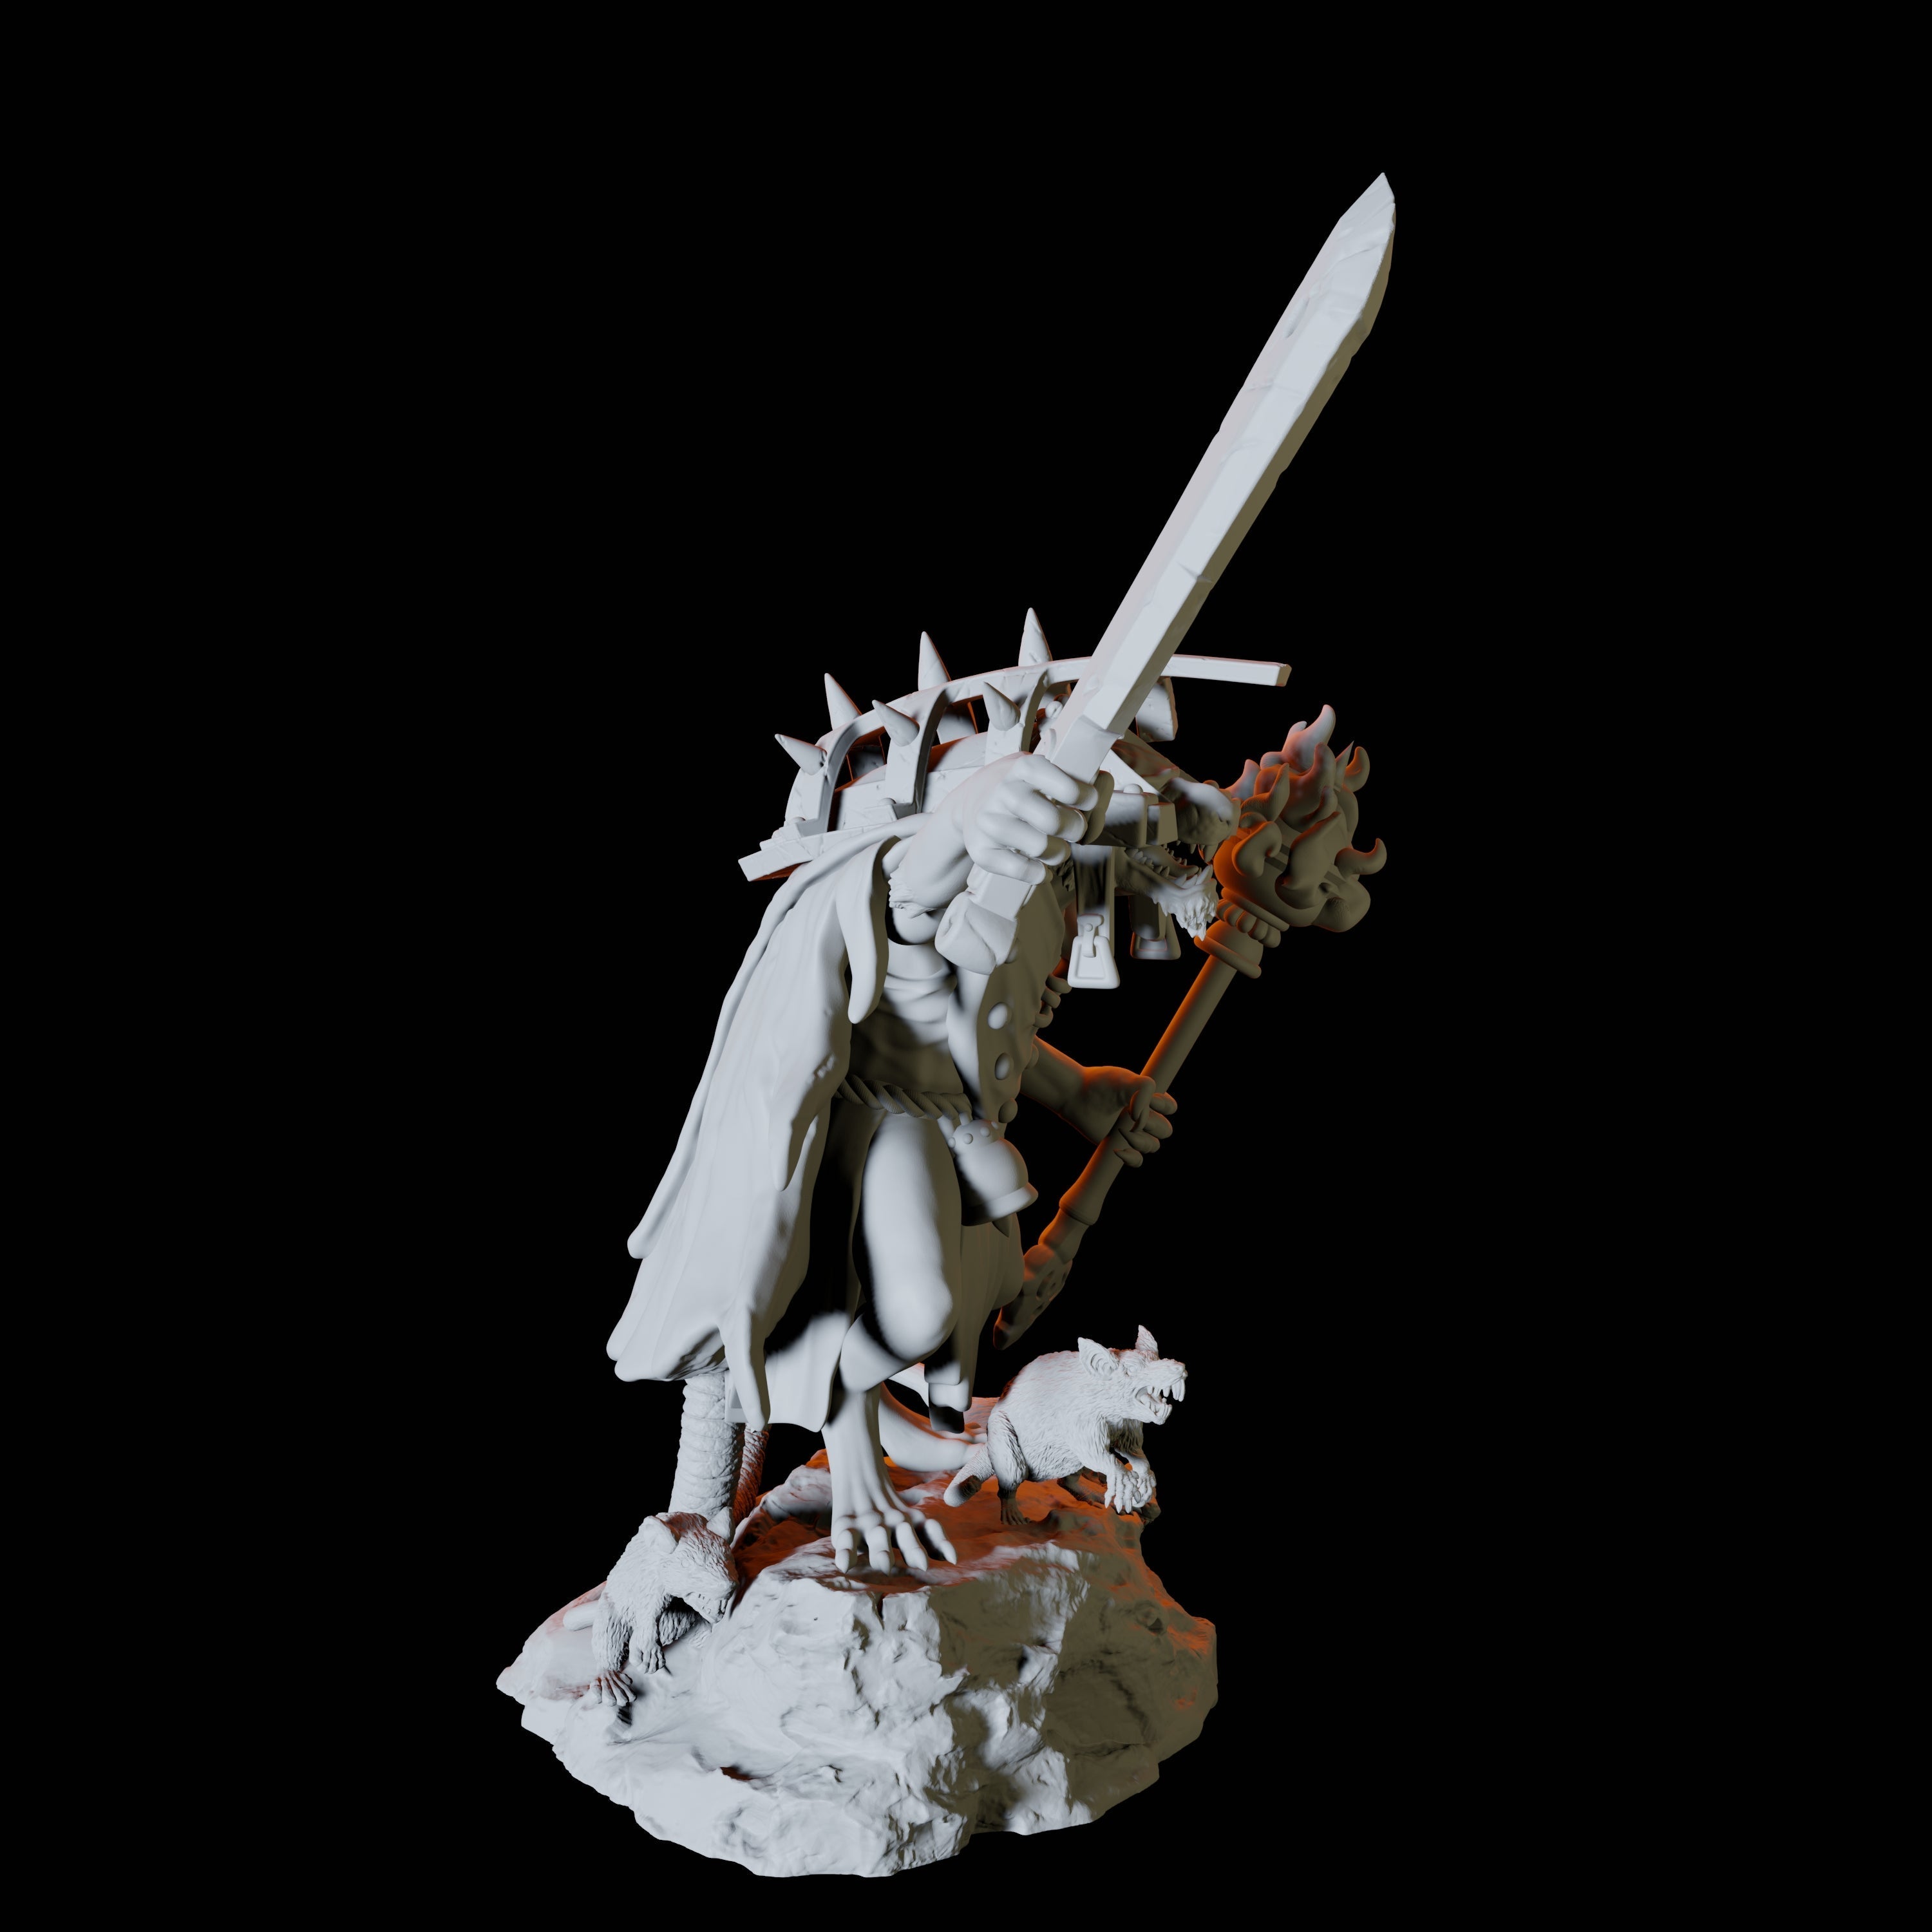 Crusader Ratfolk D Miniature for Dungeons and Dragons, Pathfinder or other TTRPGs